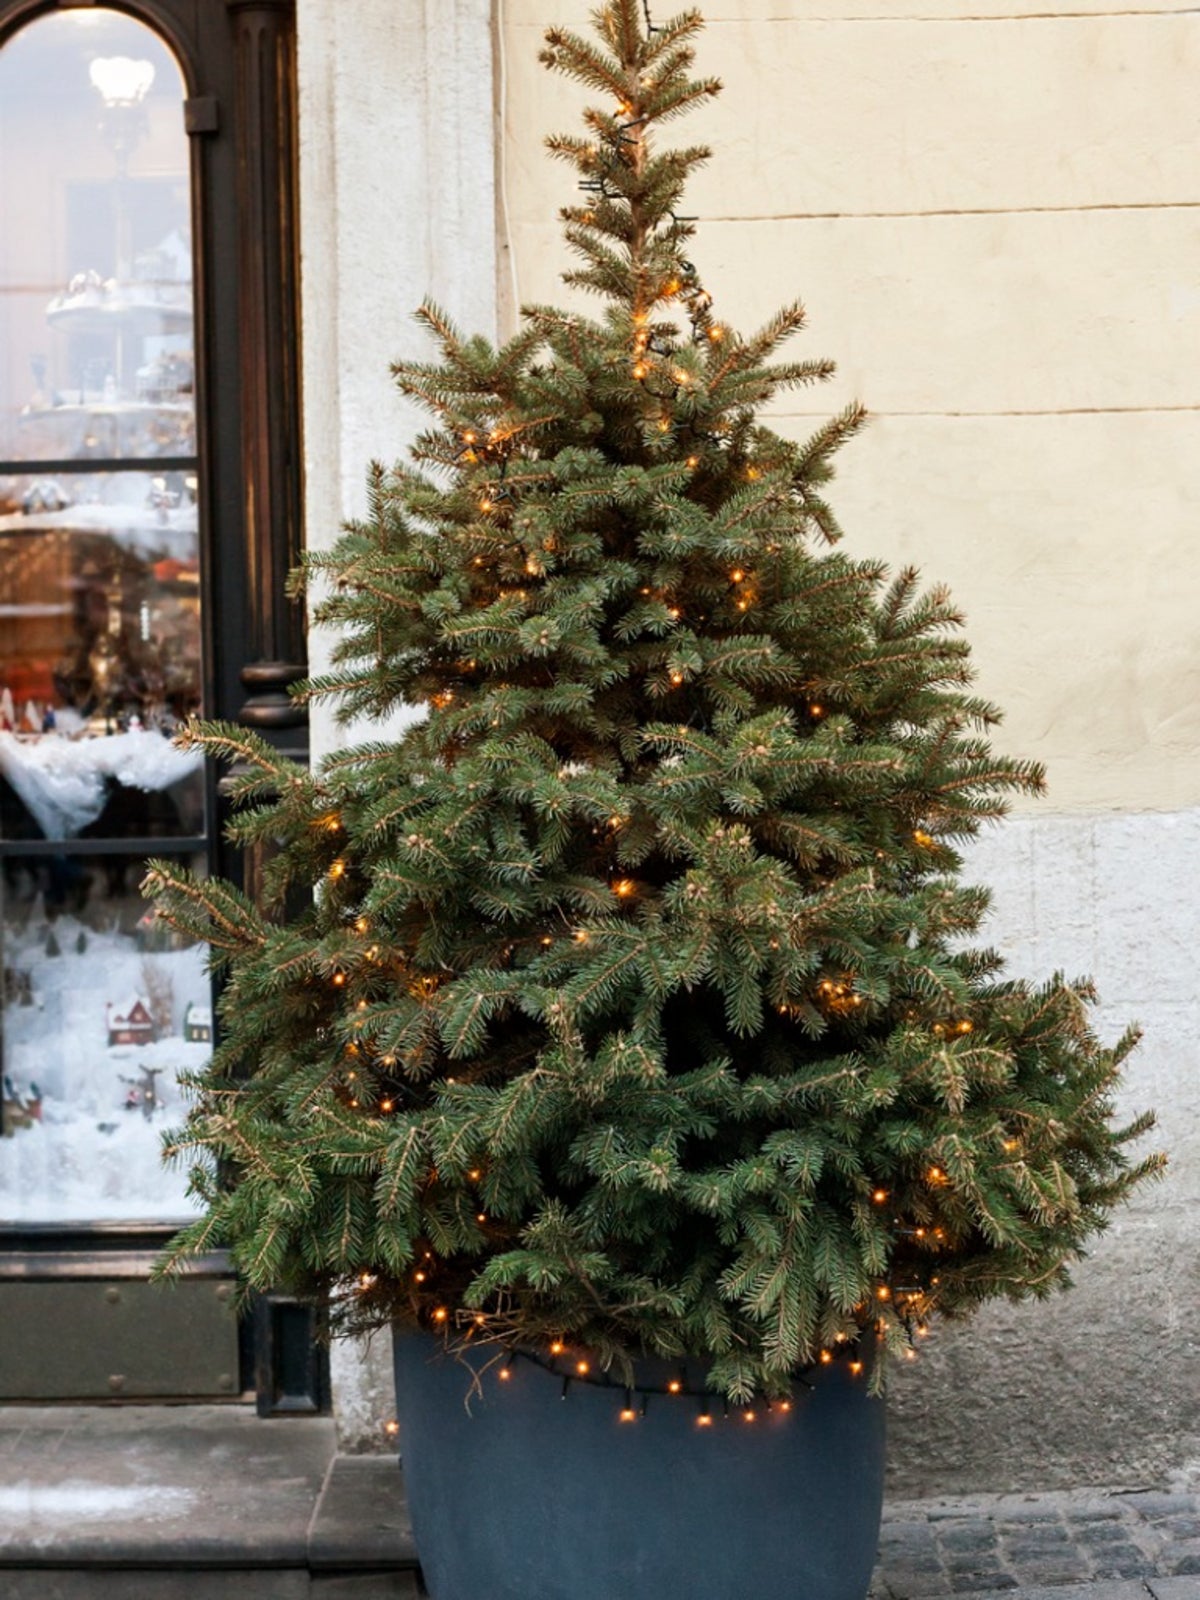 Caring For A Live Christmas Tree In Your Home   Christmas Tree Care